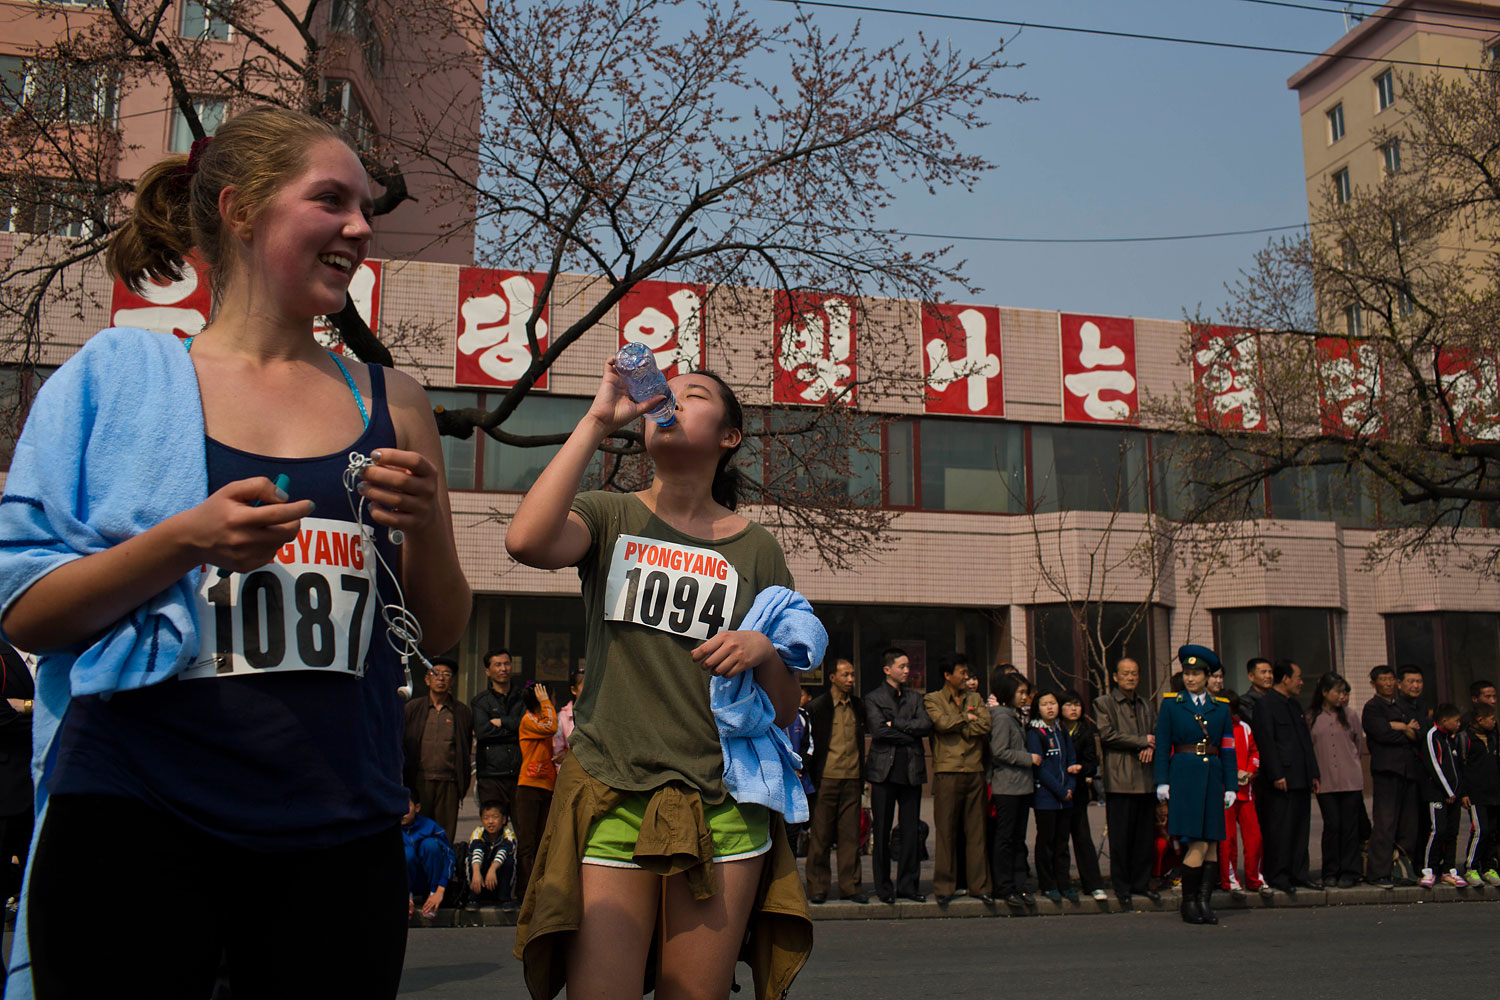 Tourists who competed in the shorter distance segments of the marathon, rest at the end of the race on April 13, 2014. From left are Harriet Harrper-Jones, England, and Allie Wu, Taiwan. The sign behind them reads "Long Live the Shining Revolutionary Tradition of Our Party."